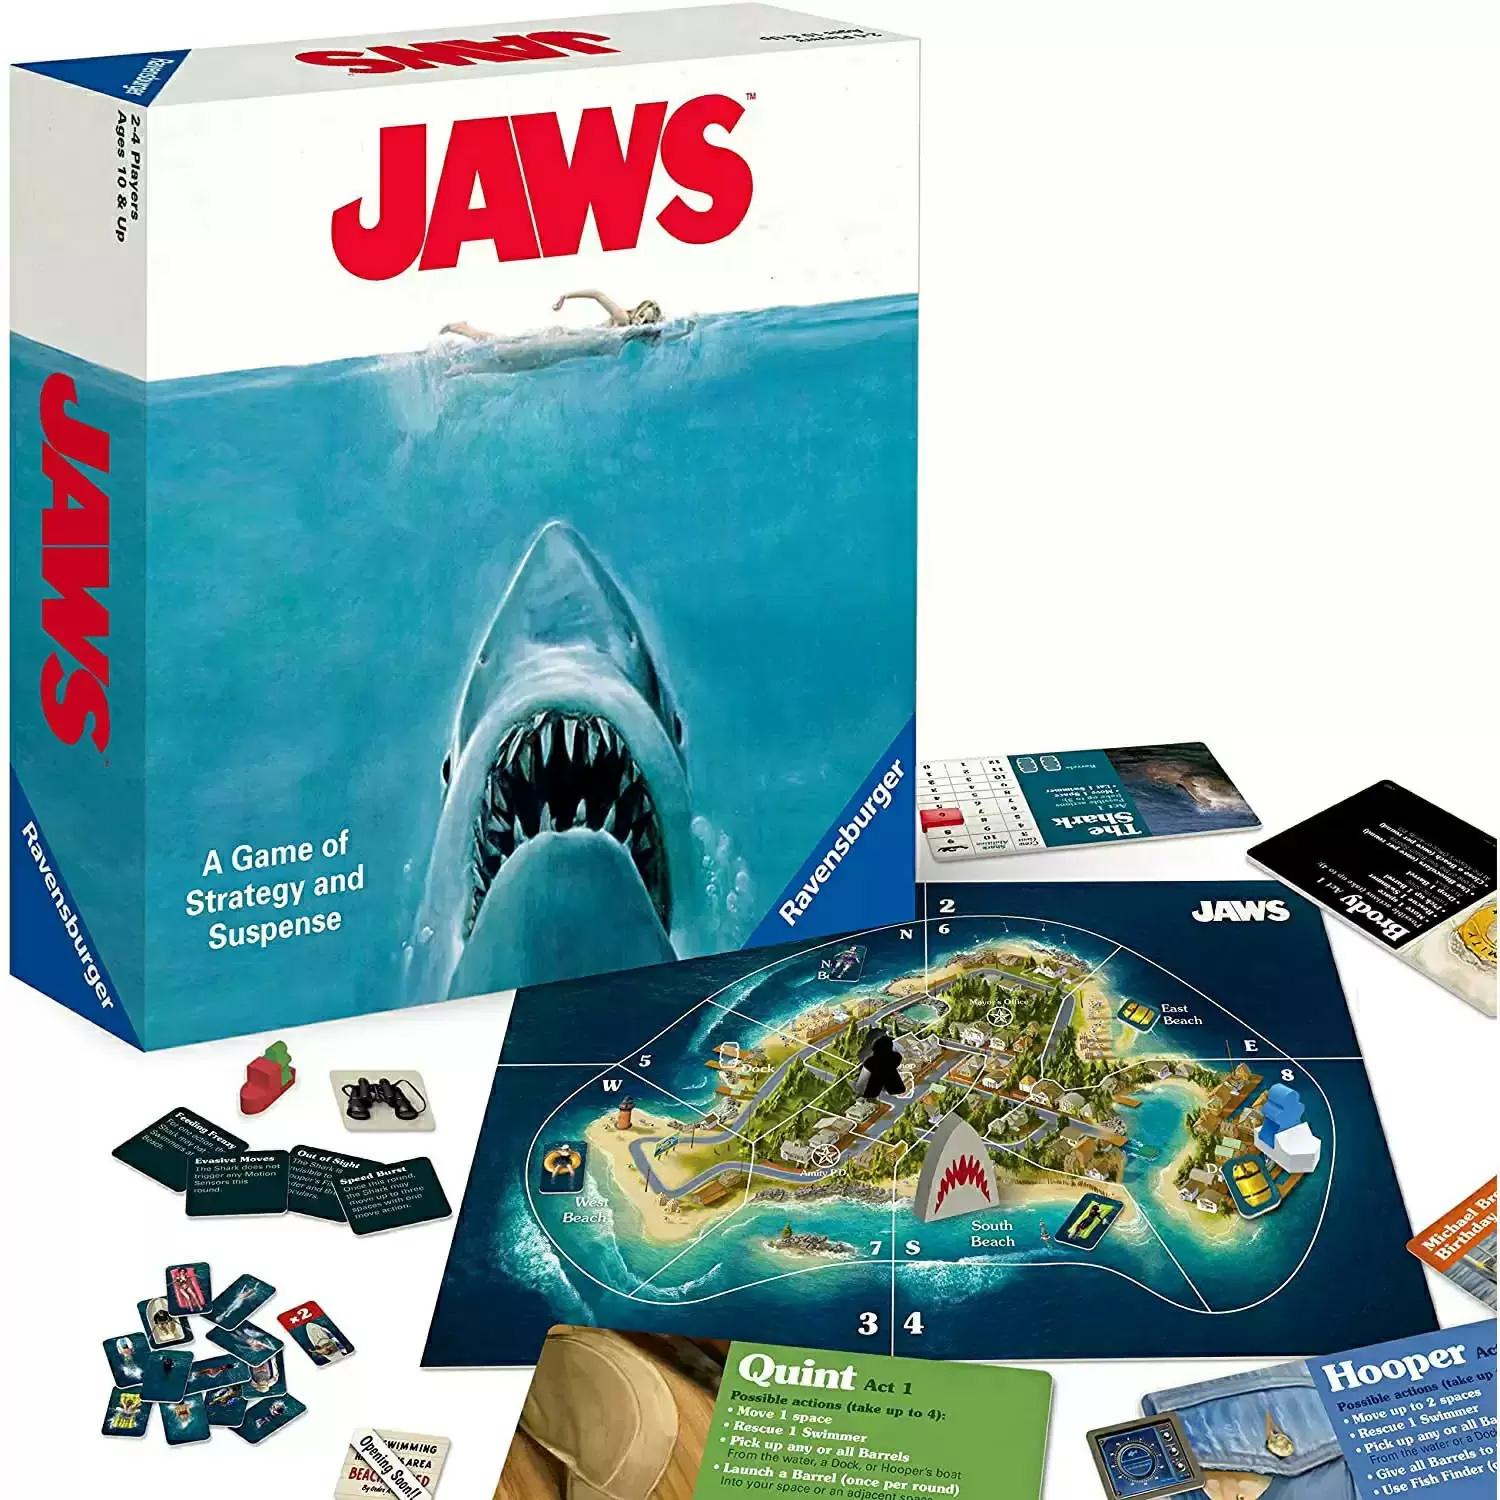 Ravensburger Jaws Board Game for $8.44